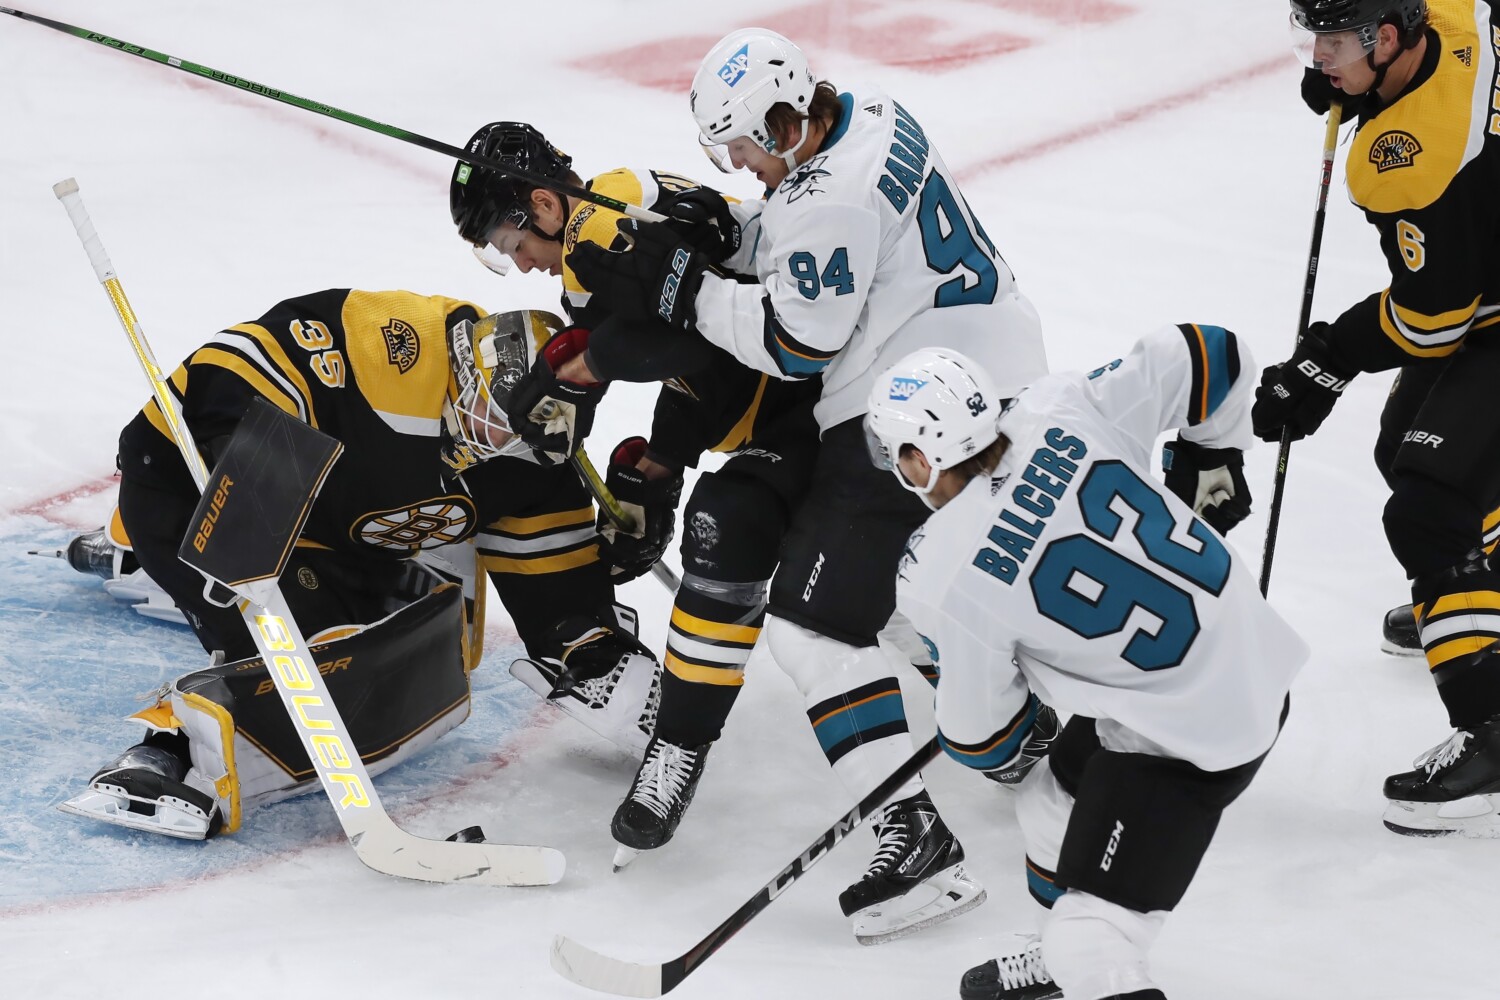 Season Review: Bonino Can Still Help Sharks, Just in Different Role